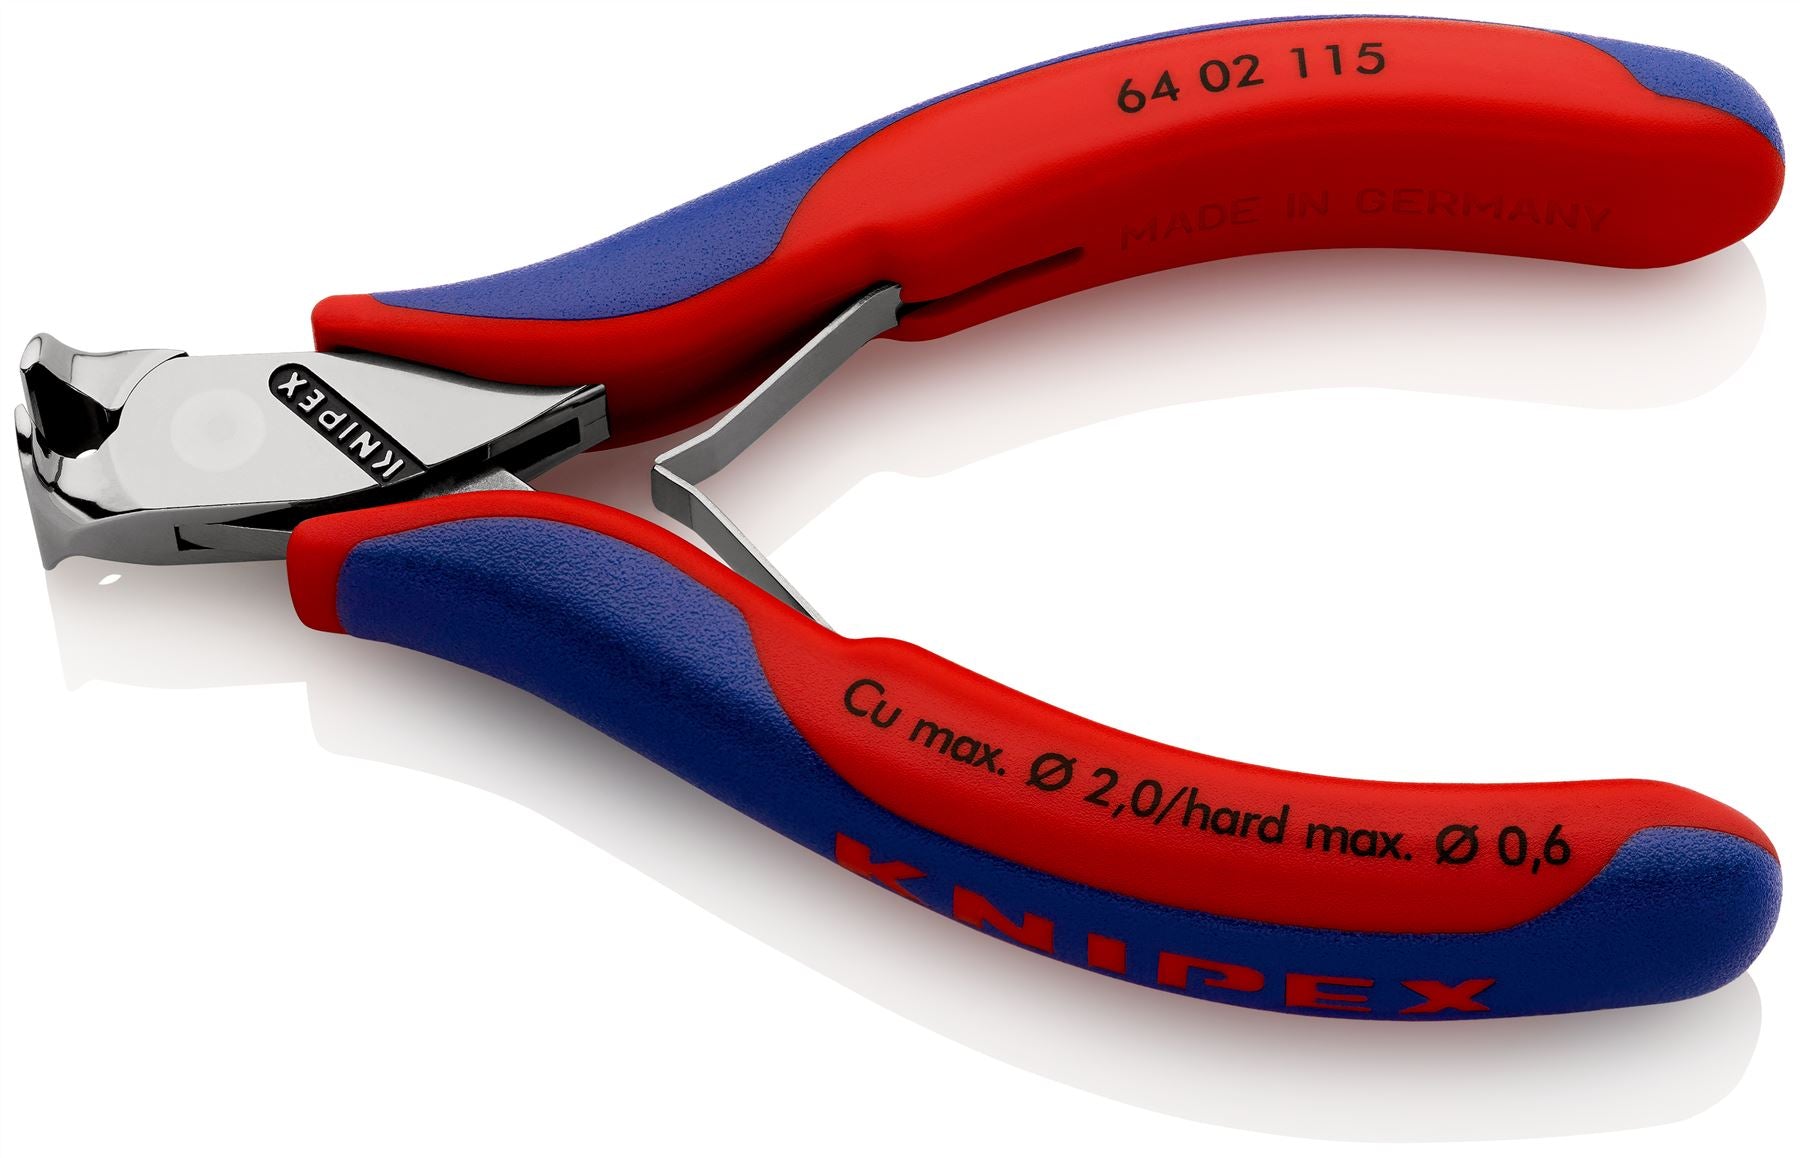 KNIPEX Precision Electronics End Cutting Nipper Pliers 115mm Multi Component Grips 62 02 115